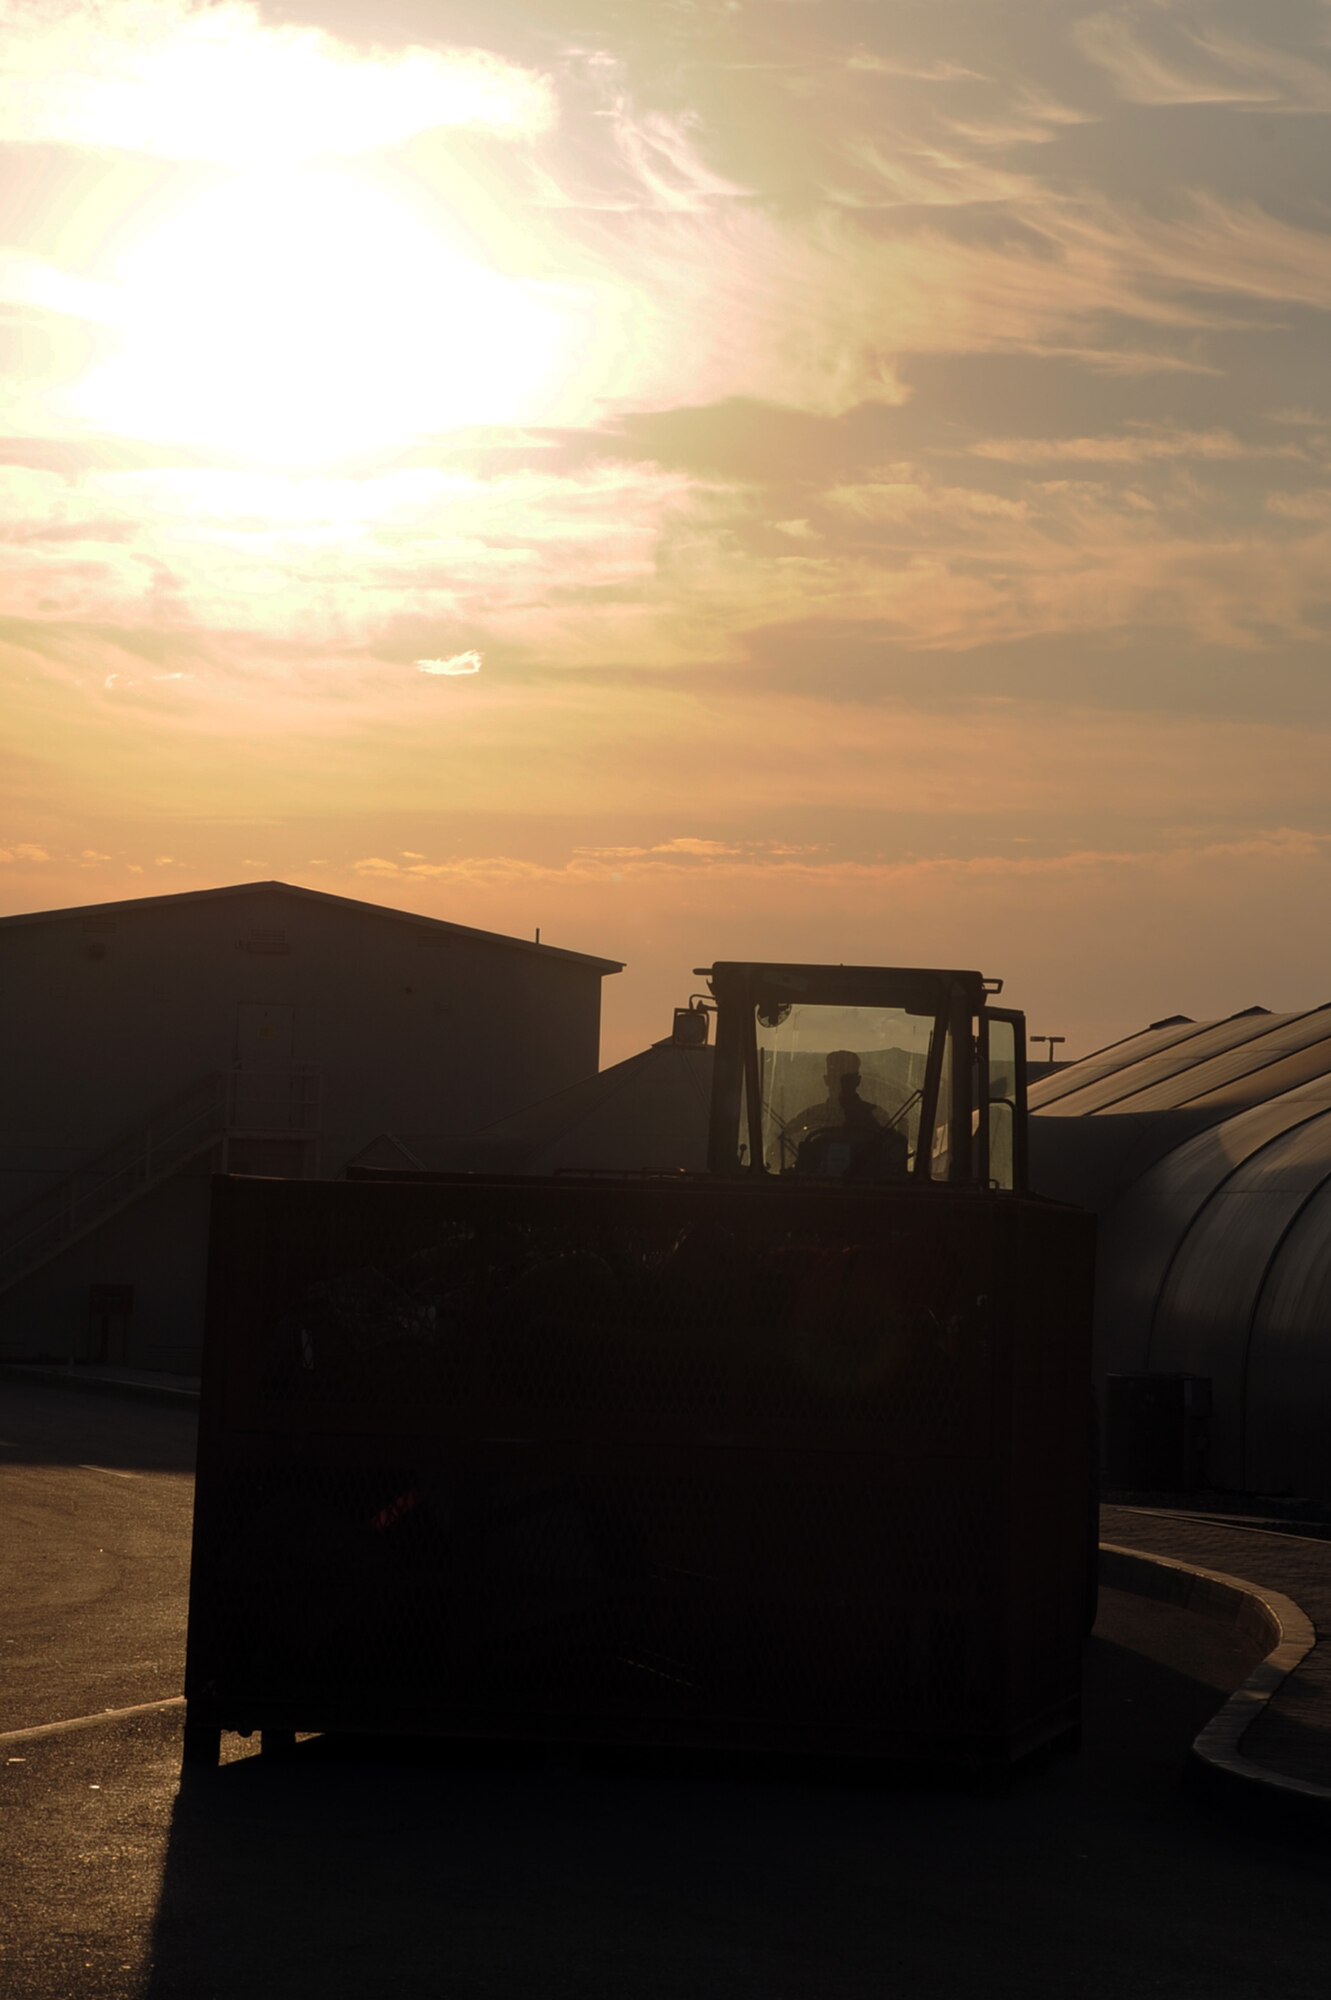 An air transportation Airman from the 380th Expeditionary Logistics Readiness Squadron uses an extreme terrain forklift to move some cargo bins in the camp of the 380th Air Expeditionary Wing during sunrise hours Jan. 21, 2010. The 380th Air Expeditionary Wing supports Operations Iraqi Freedom and Enduring Freedom and the Combined Joint Task Force-Horn of Africa. (U.S. Air Force Photo/Tech. Sgt. Scott T. Sturkol/Released)